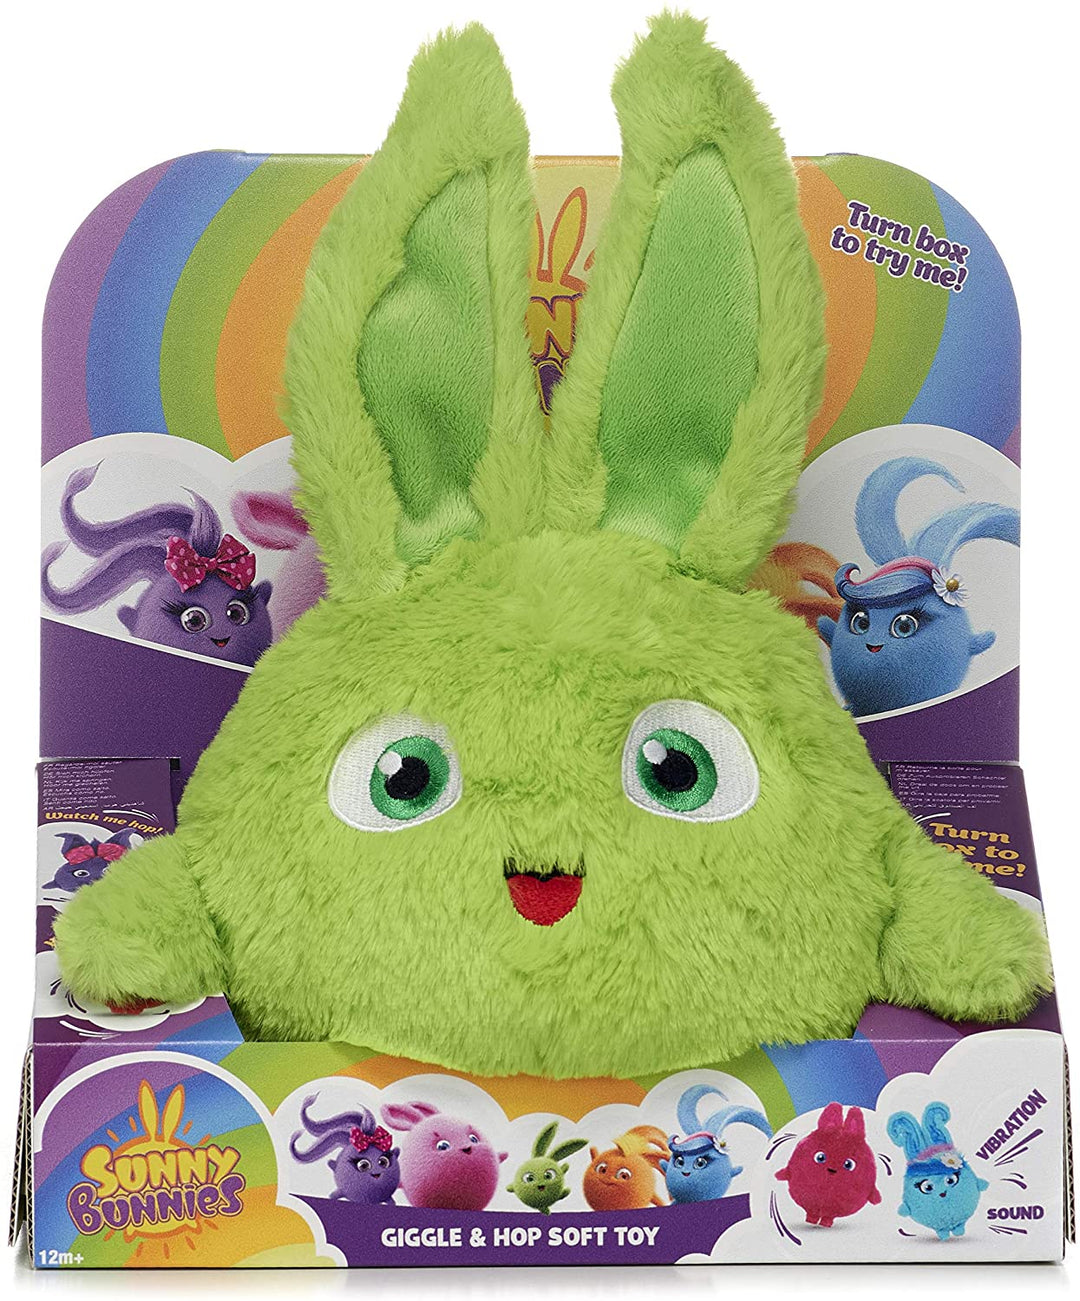 Posh Paws 37429 Sunny Bunnies Large Feature Hopper Giggle & Hop Soft Toy 29cm (11 inch)